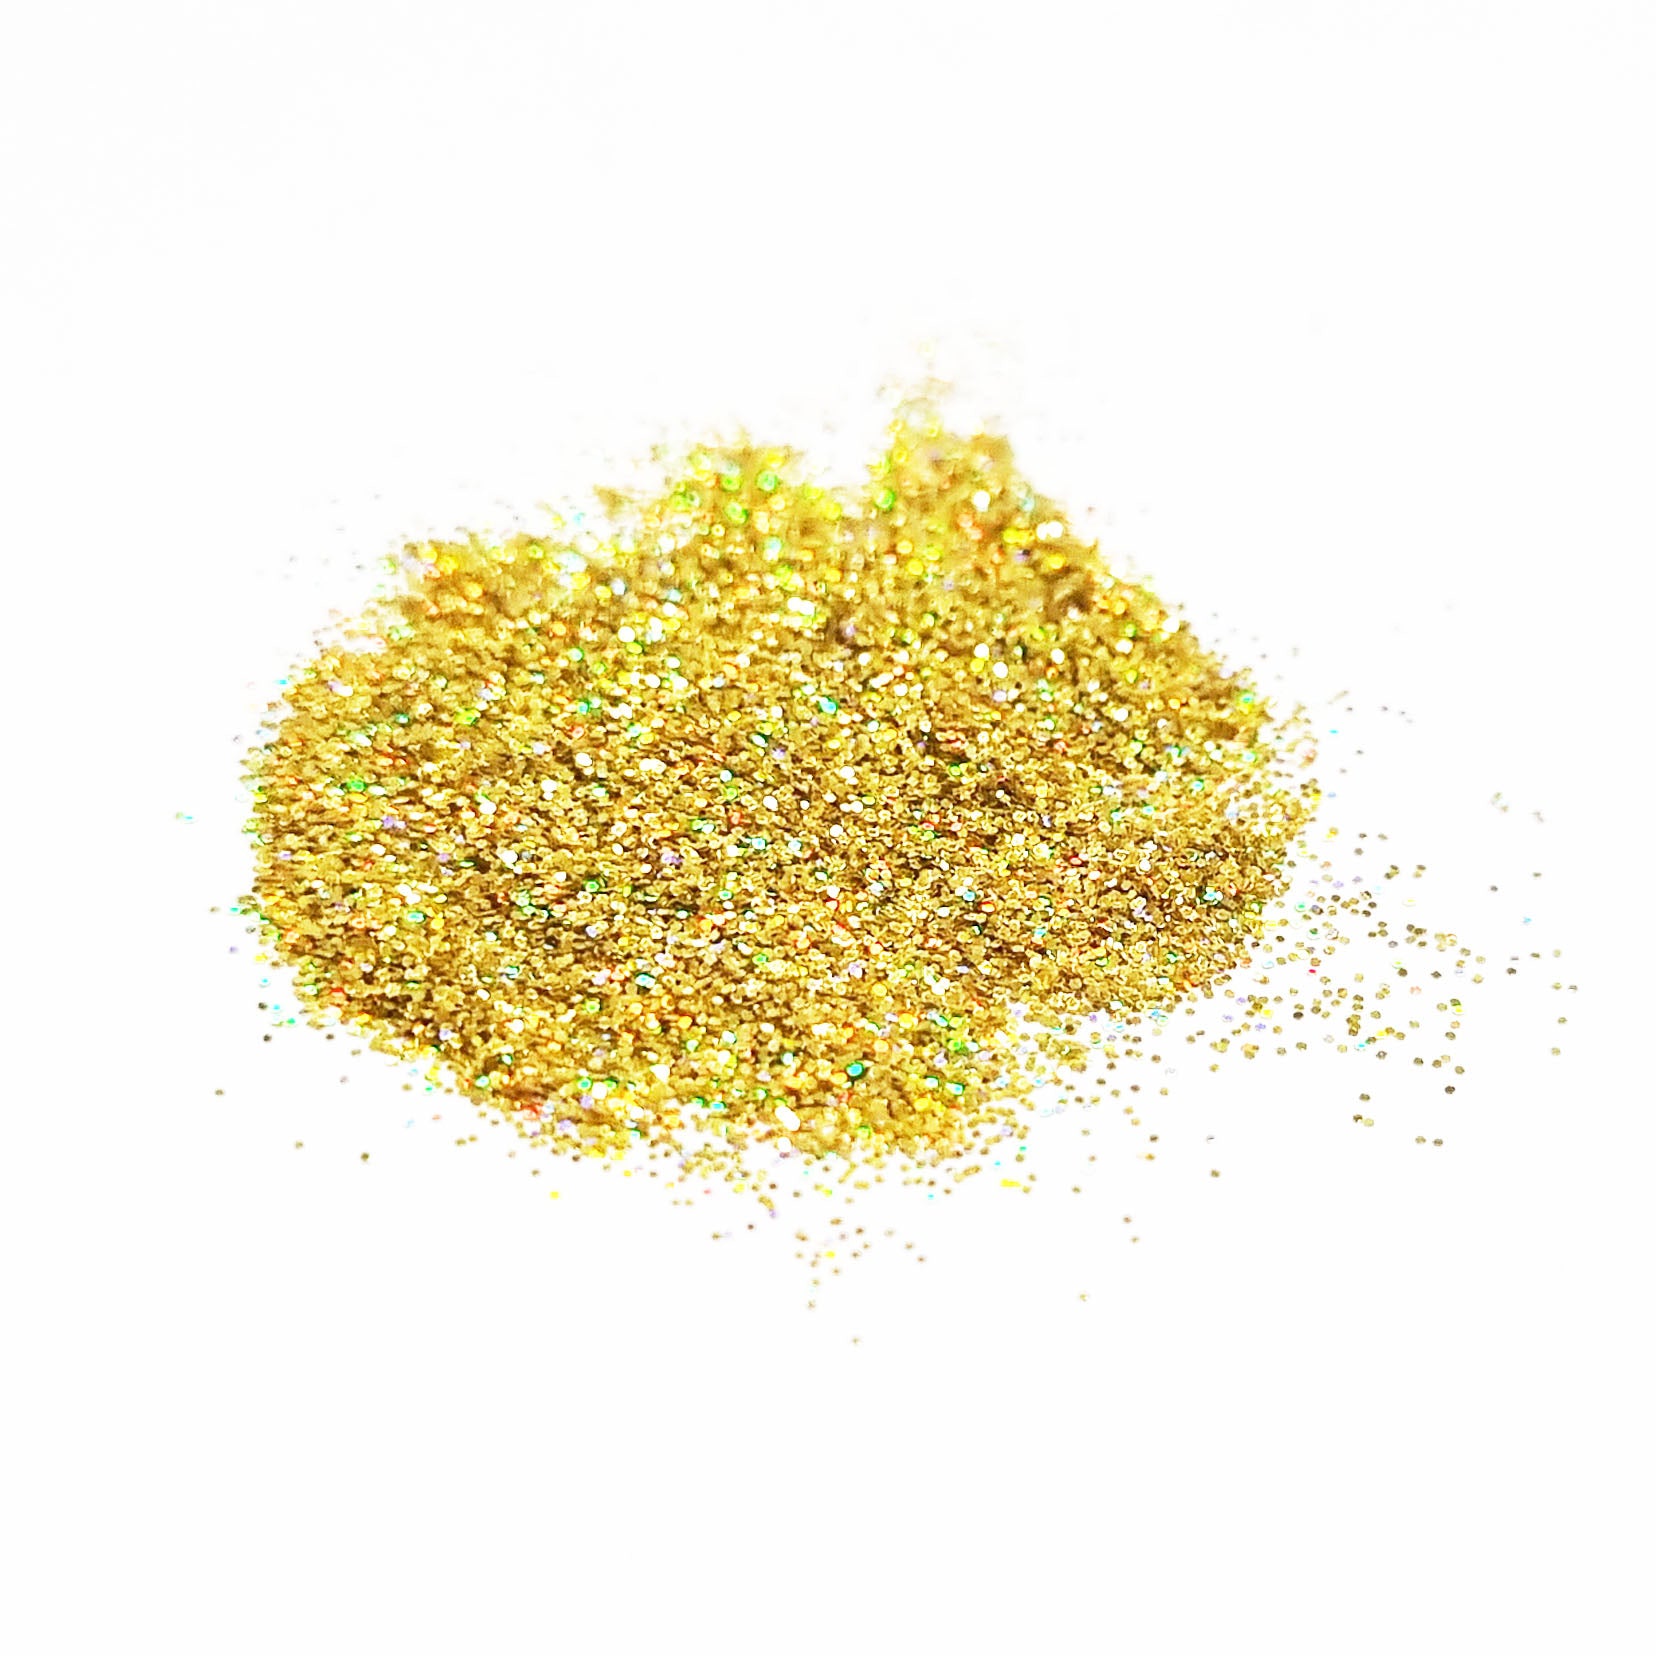 Gold Holographic Glitter | Fine | Candles, Wax Melt, Cosmetics, Bath Bombs, Shower Gel | Truly Personal Ltd